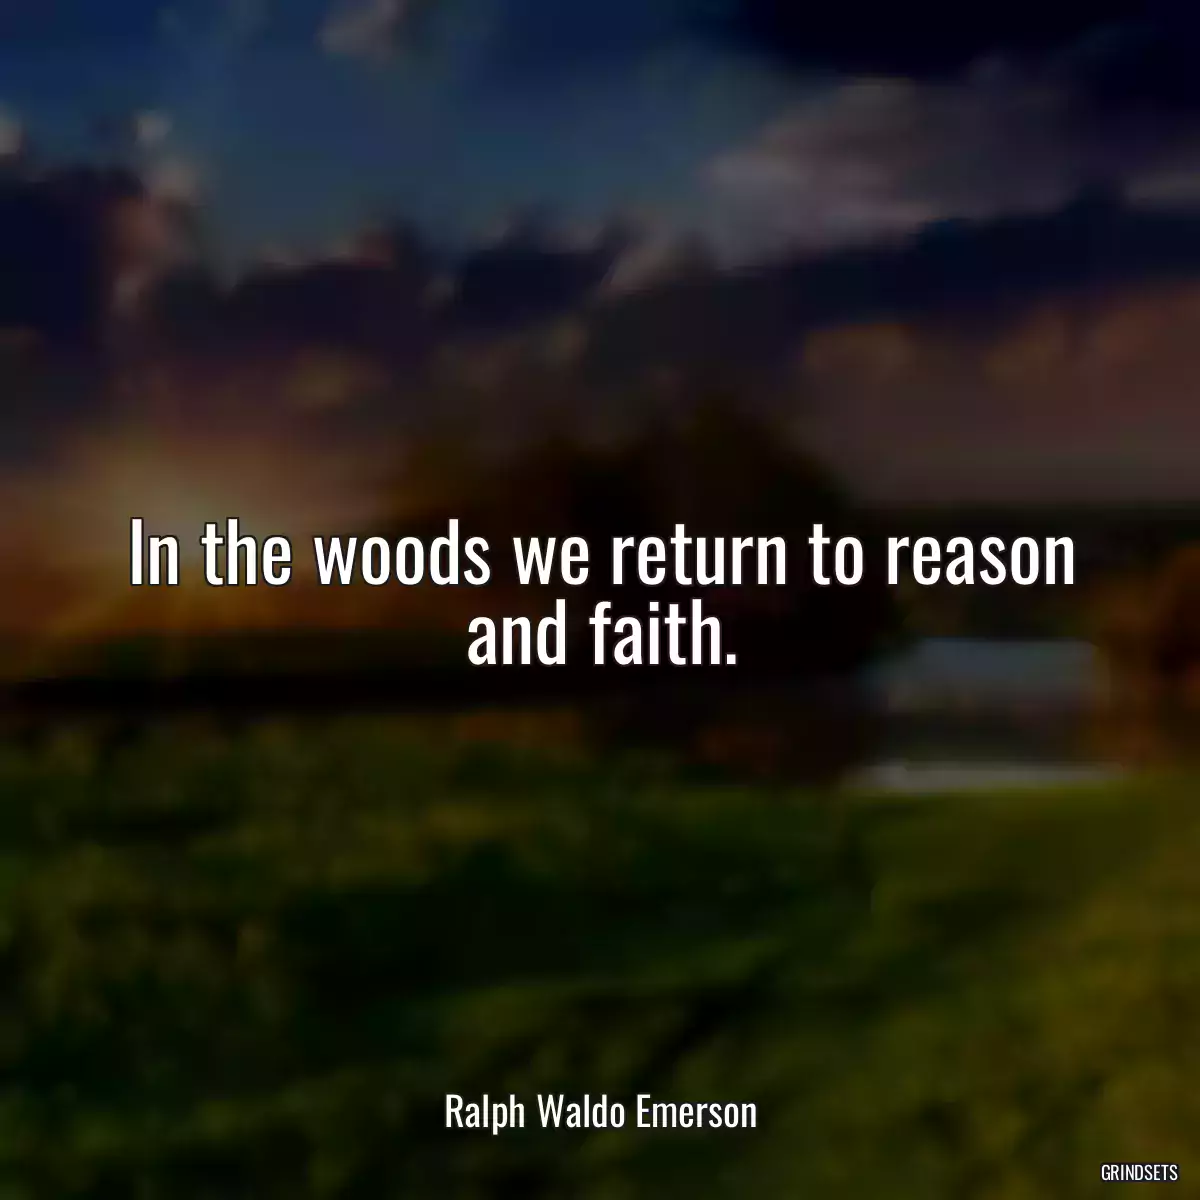 In the woods we return to reason and faith.